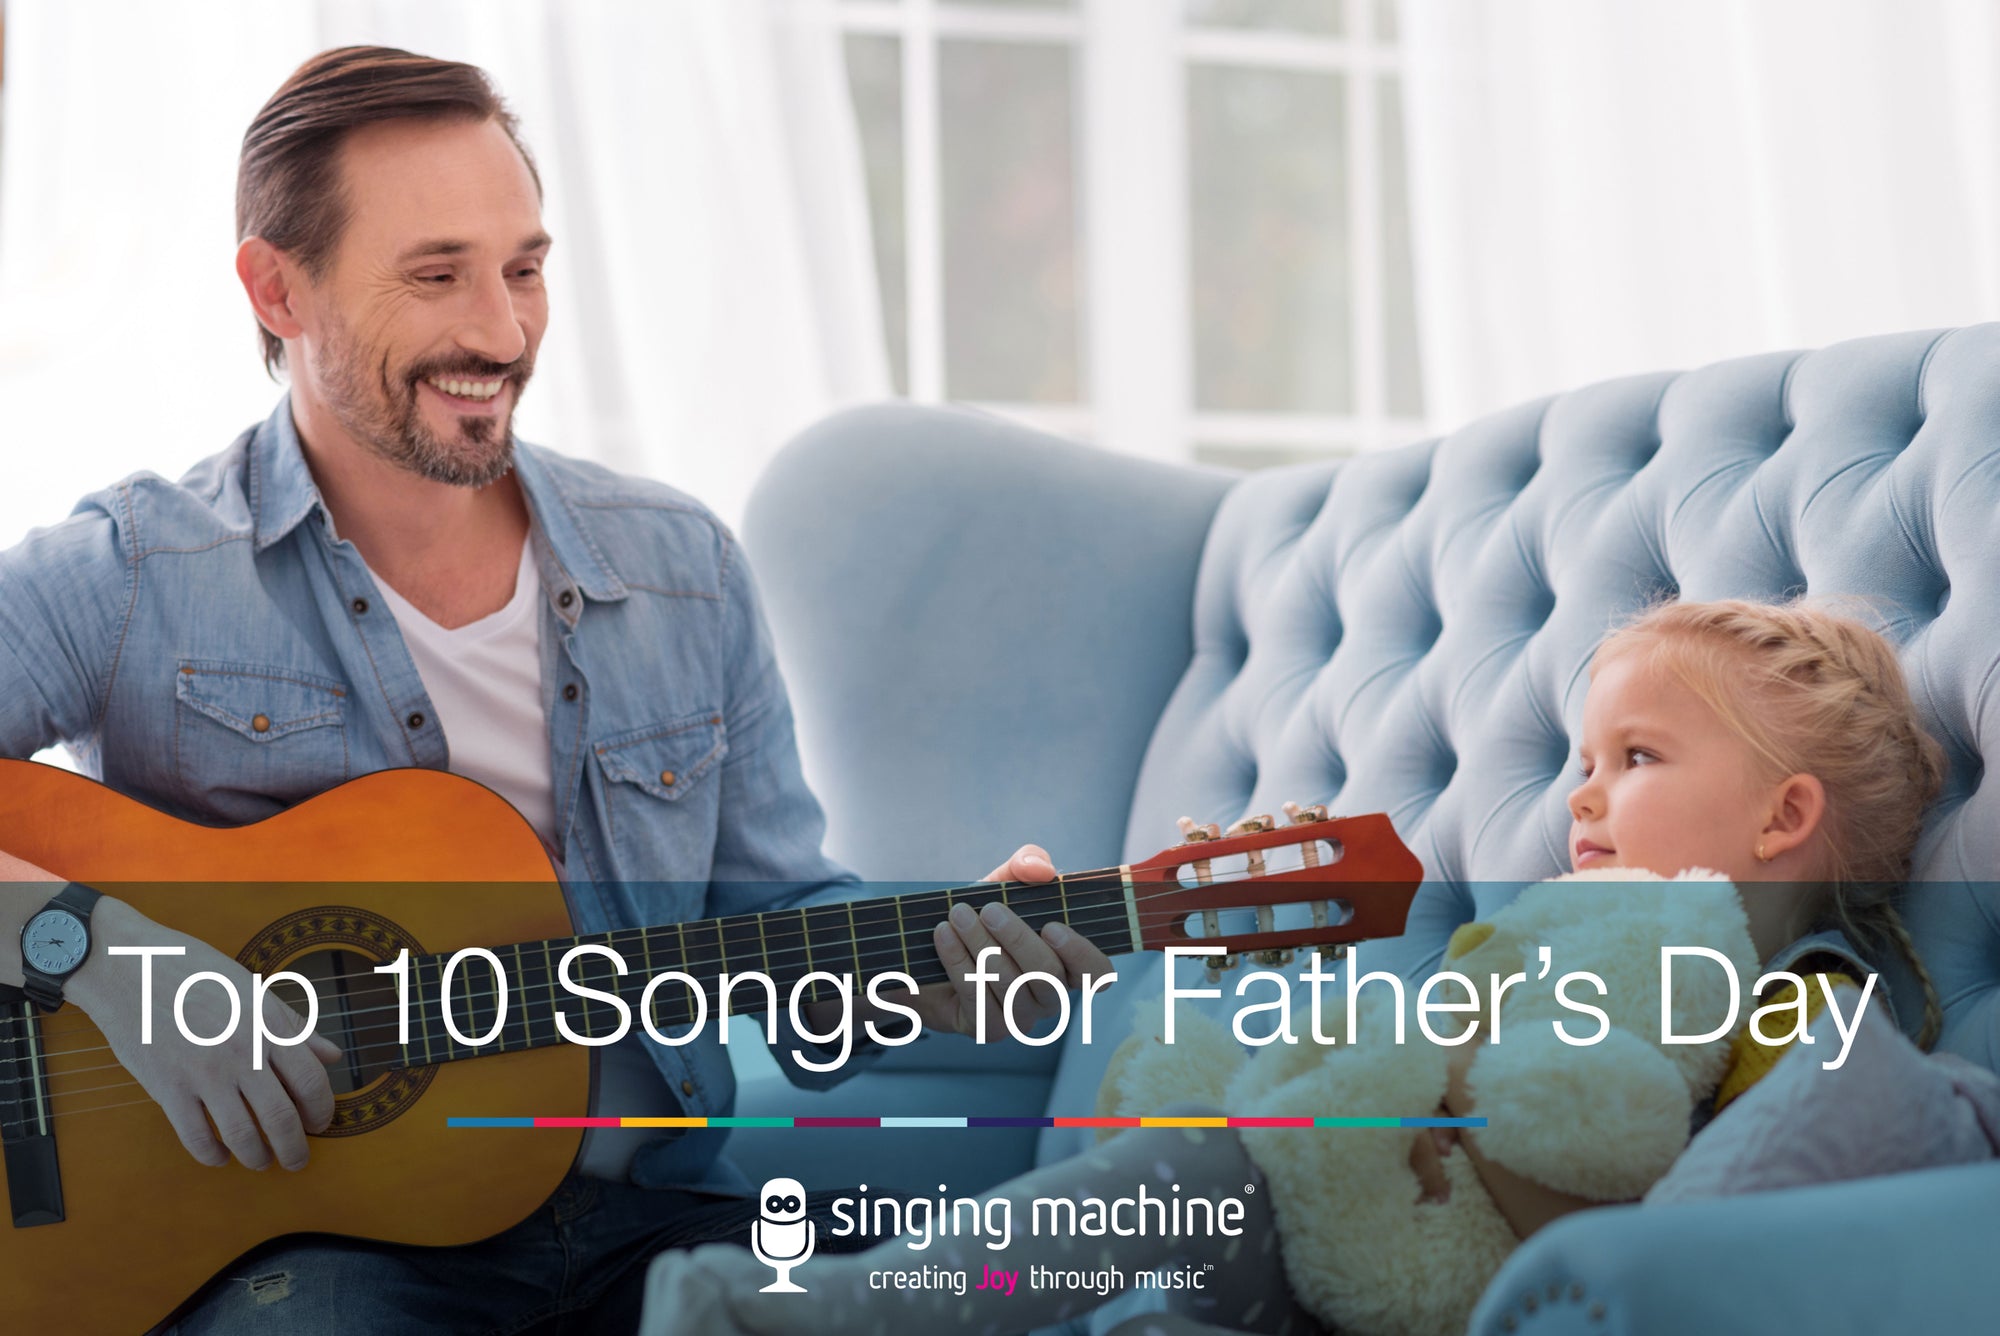 A List of Top 10 Songs for Father’s Day